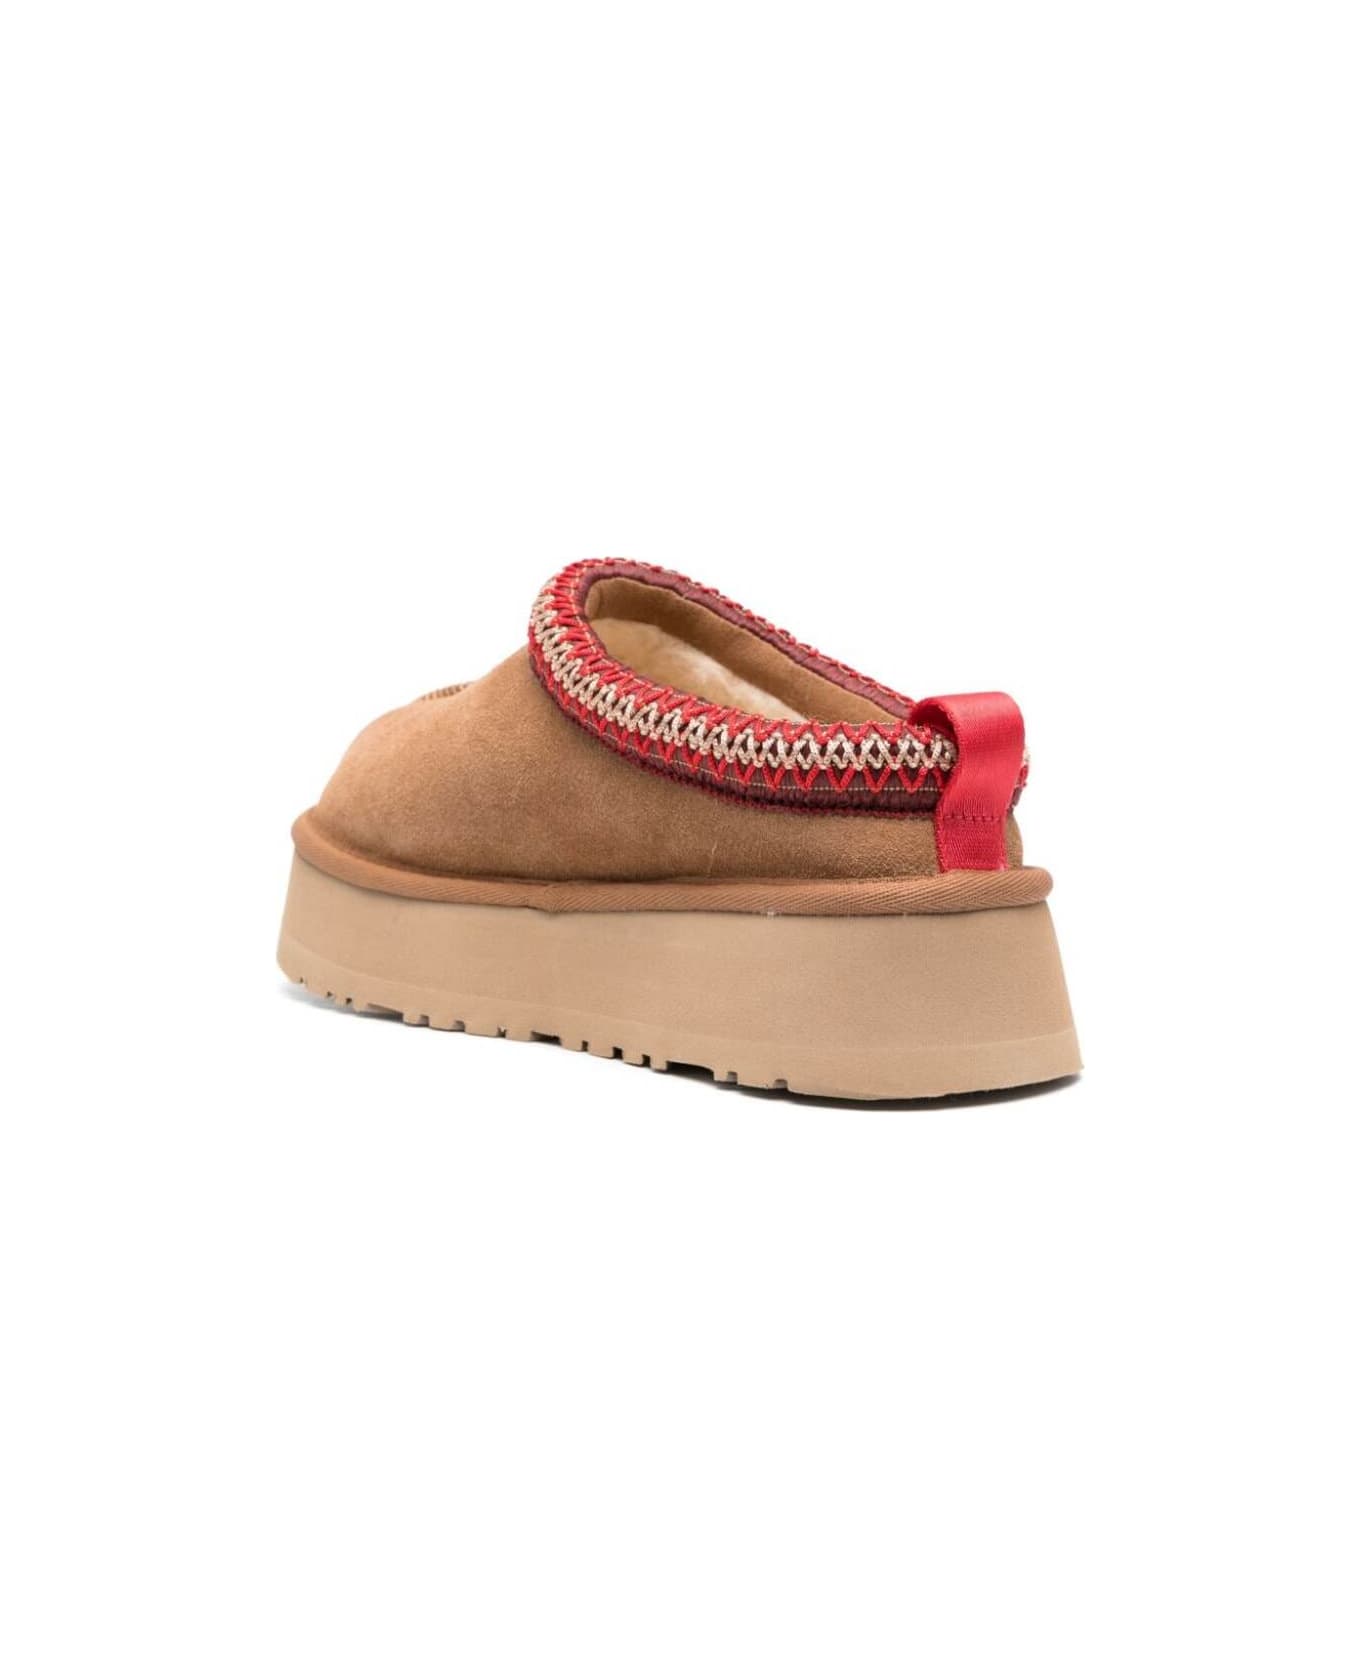 UGG Beige Slipper With Logo Embroidery In Suede Woman - Beige